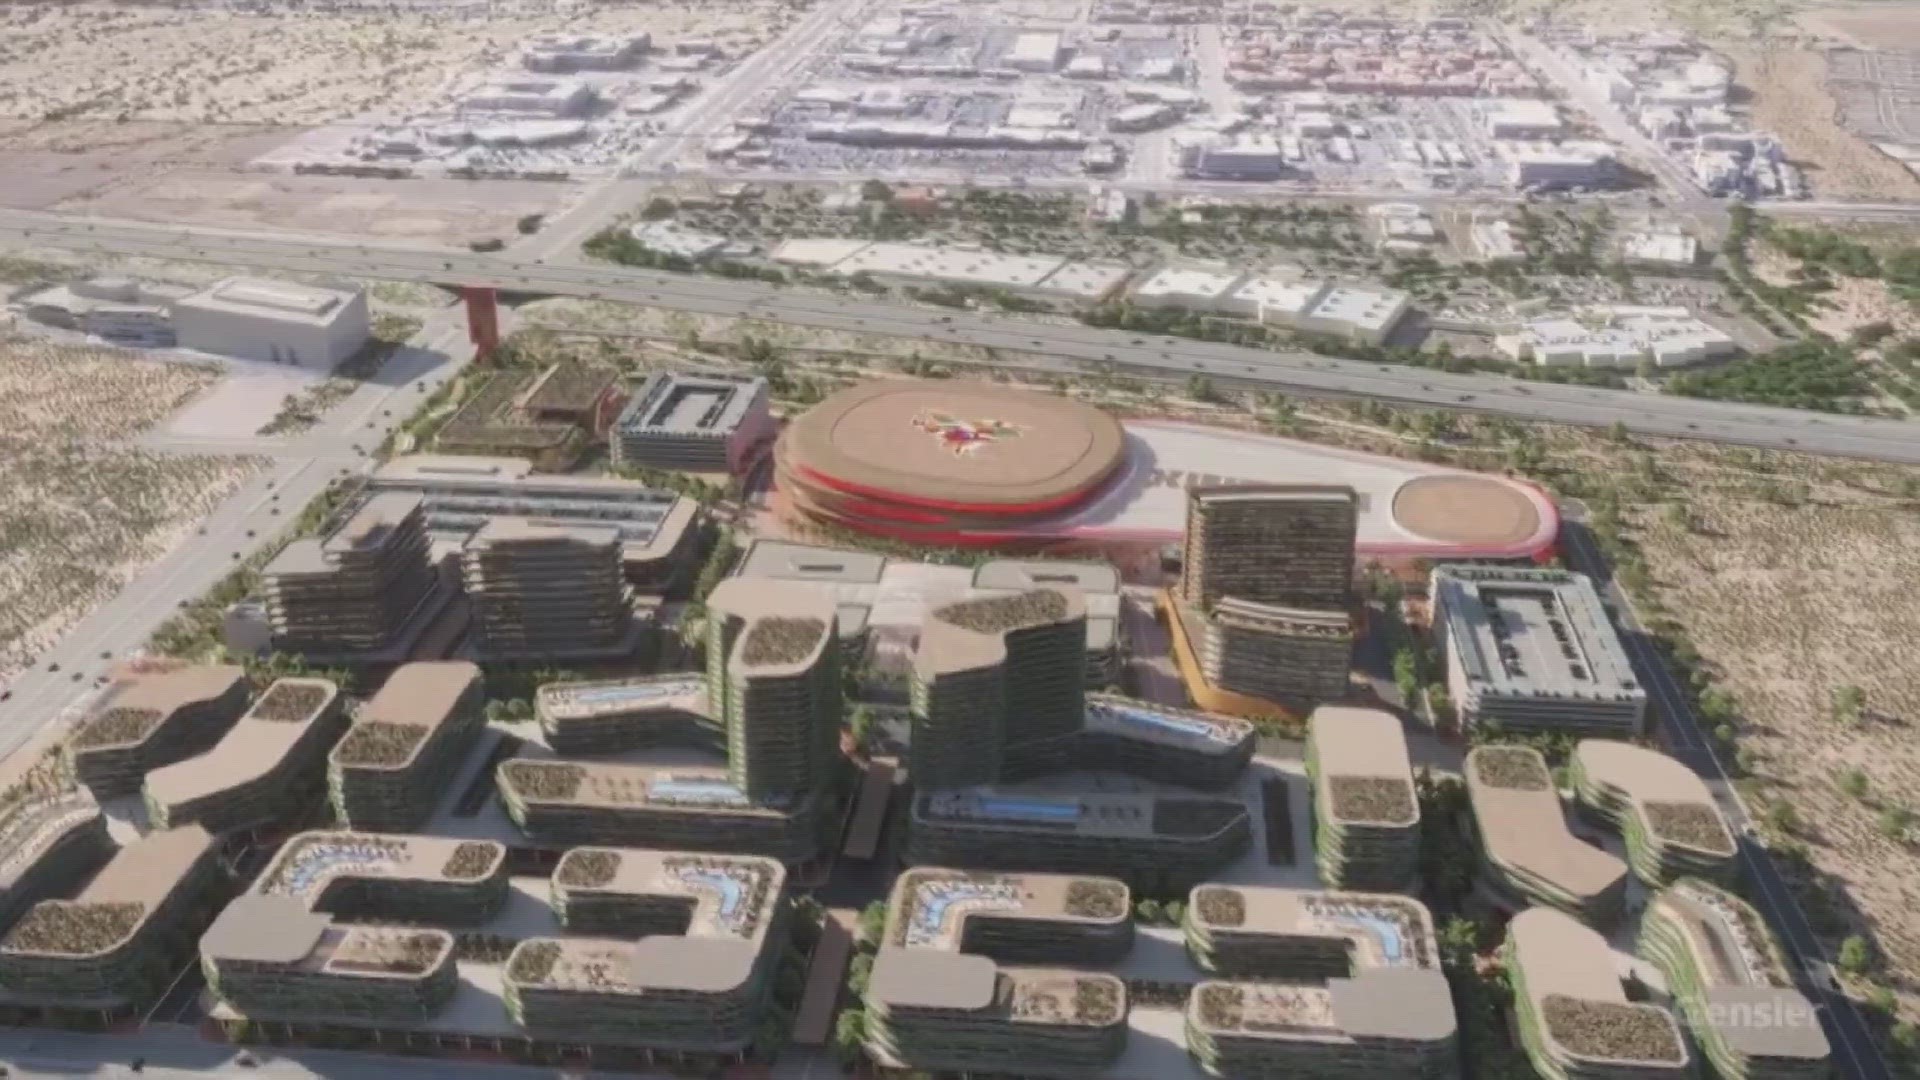 Mayor David Ortega said Scottsdale has no "water assets" available to service a new hockey arena near the city.